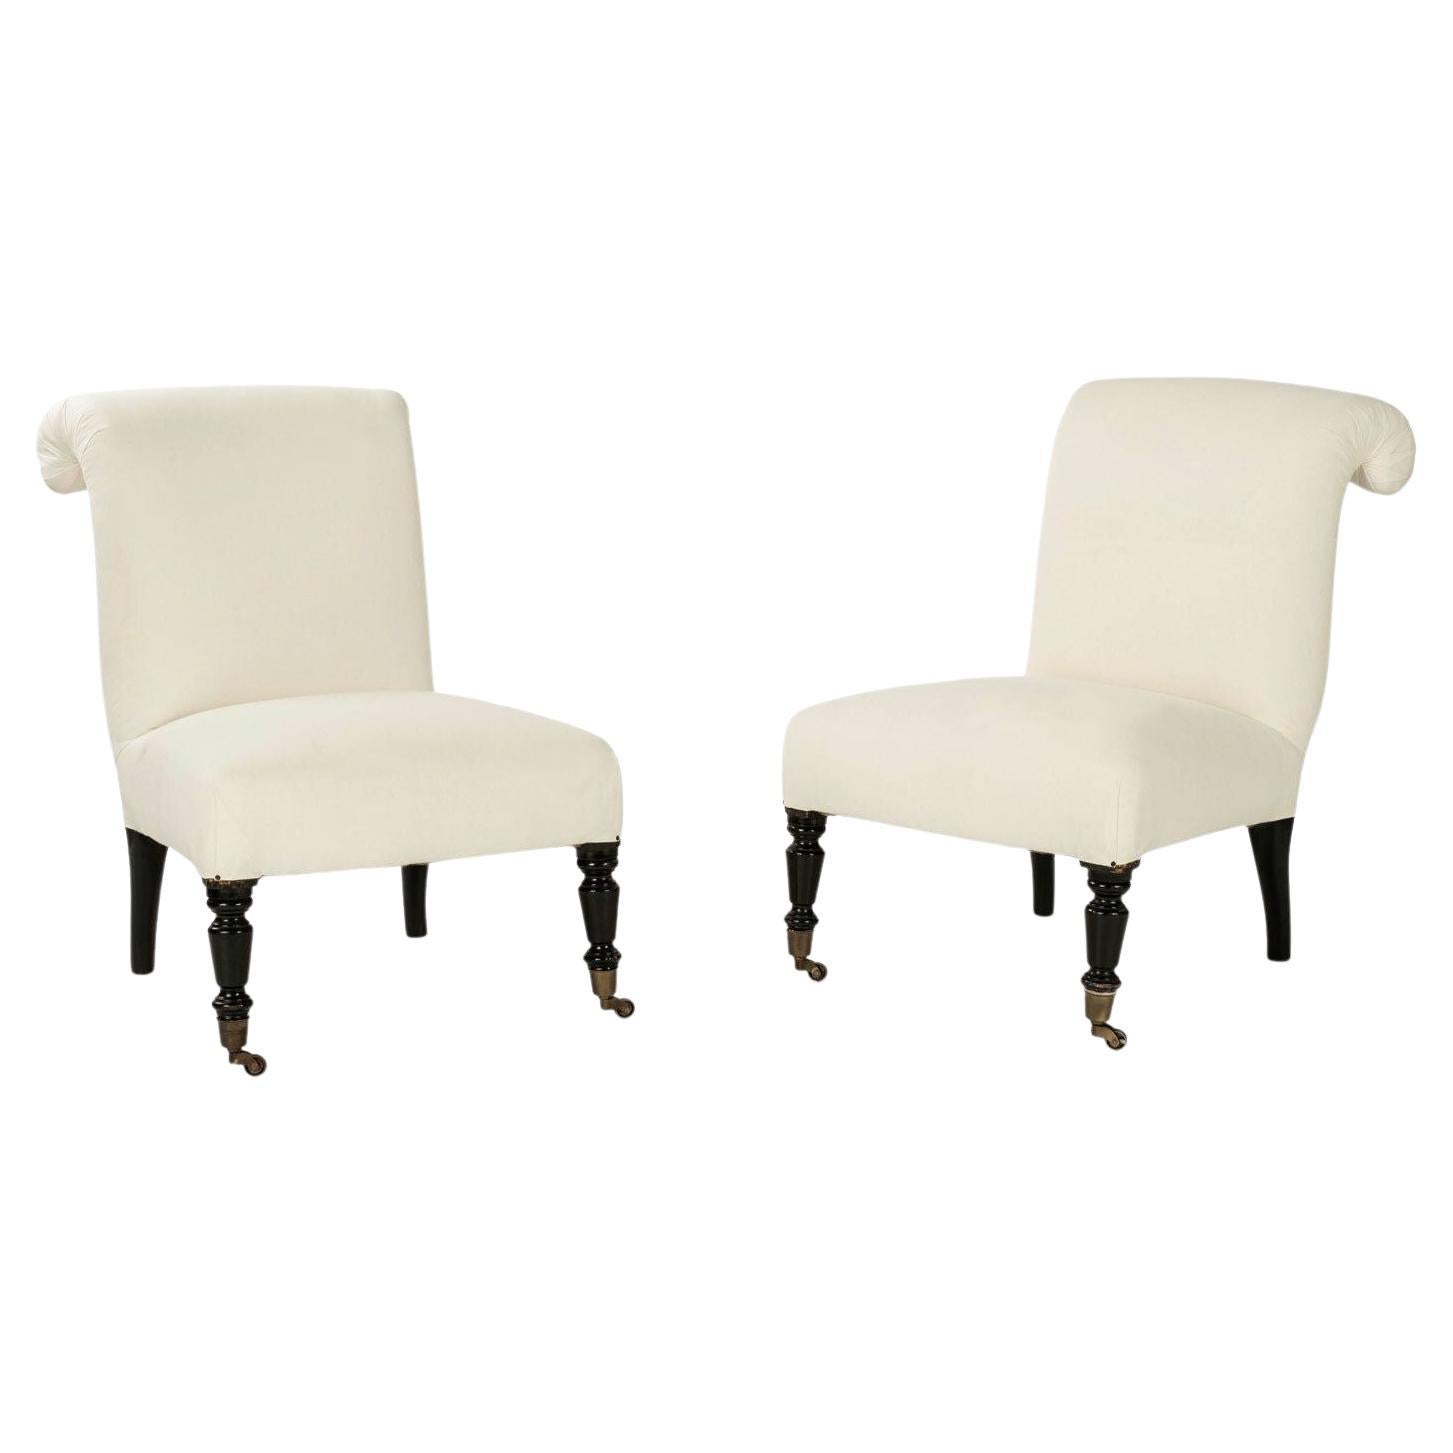 Pair of French Napoleon III Slipper Chairs Upholstered in White Linen